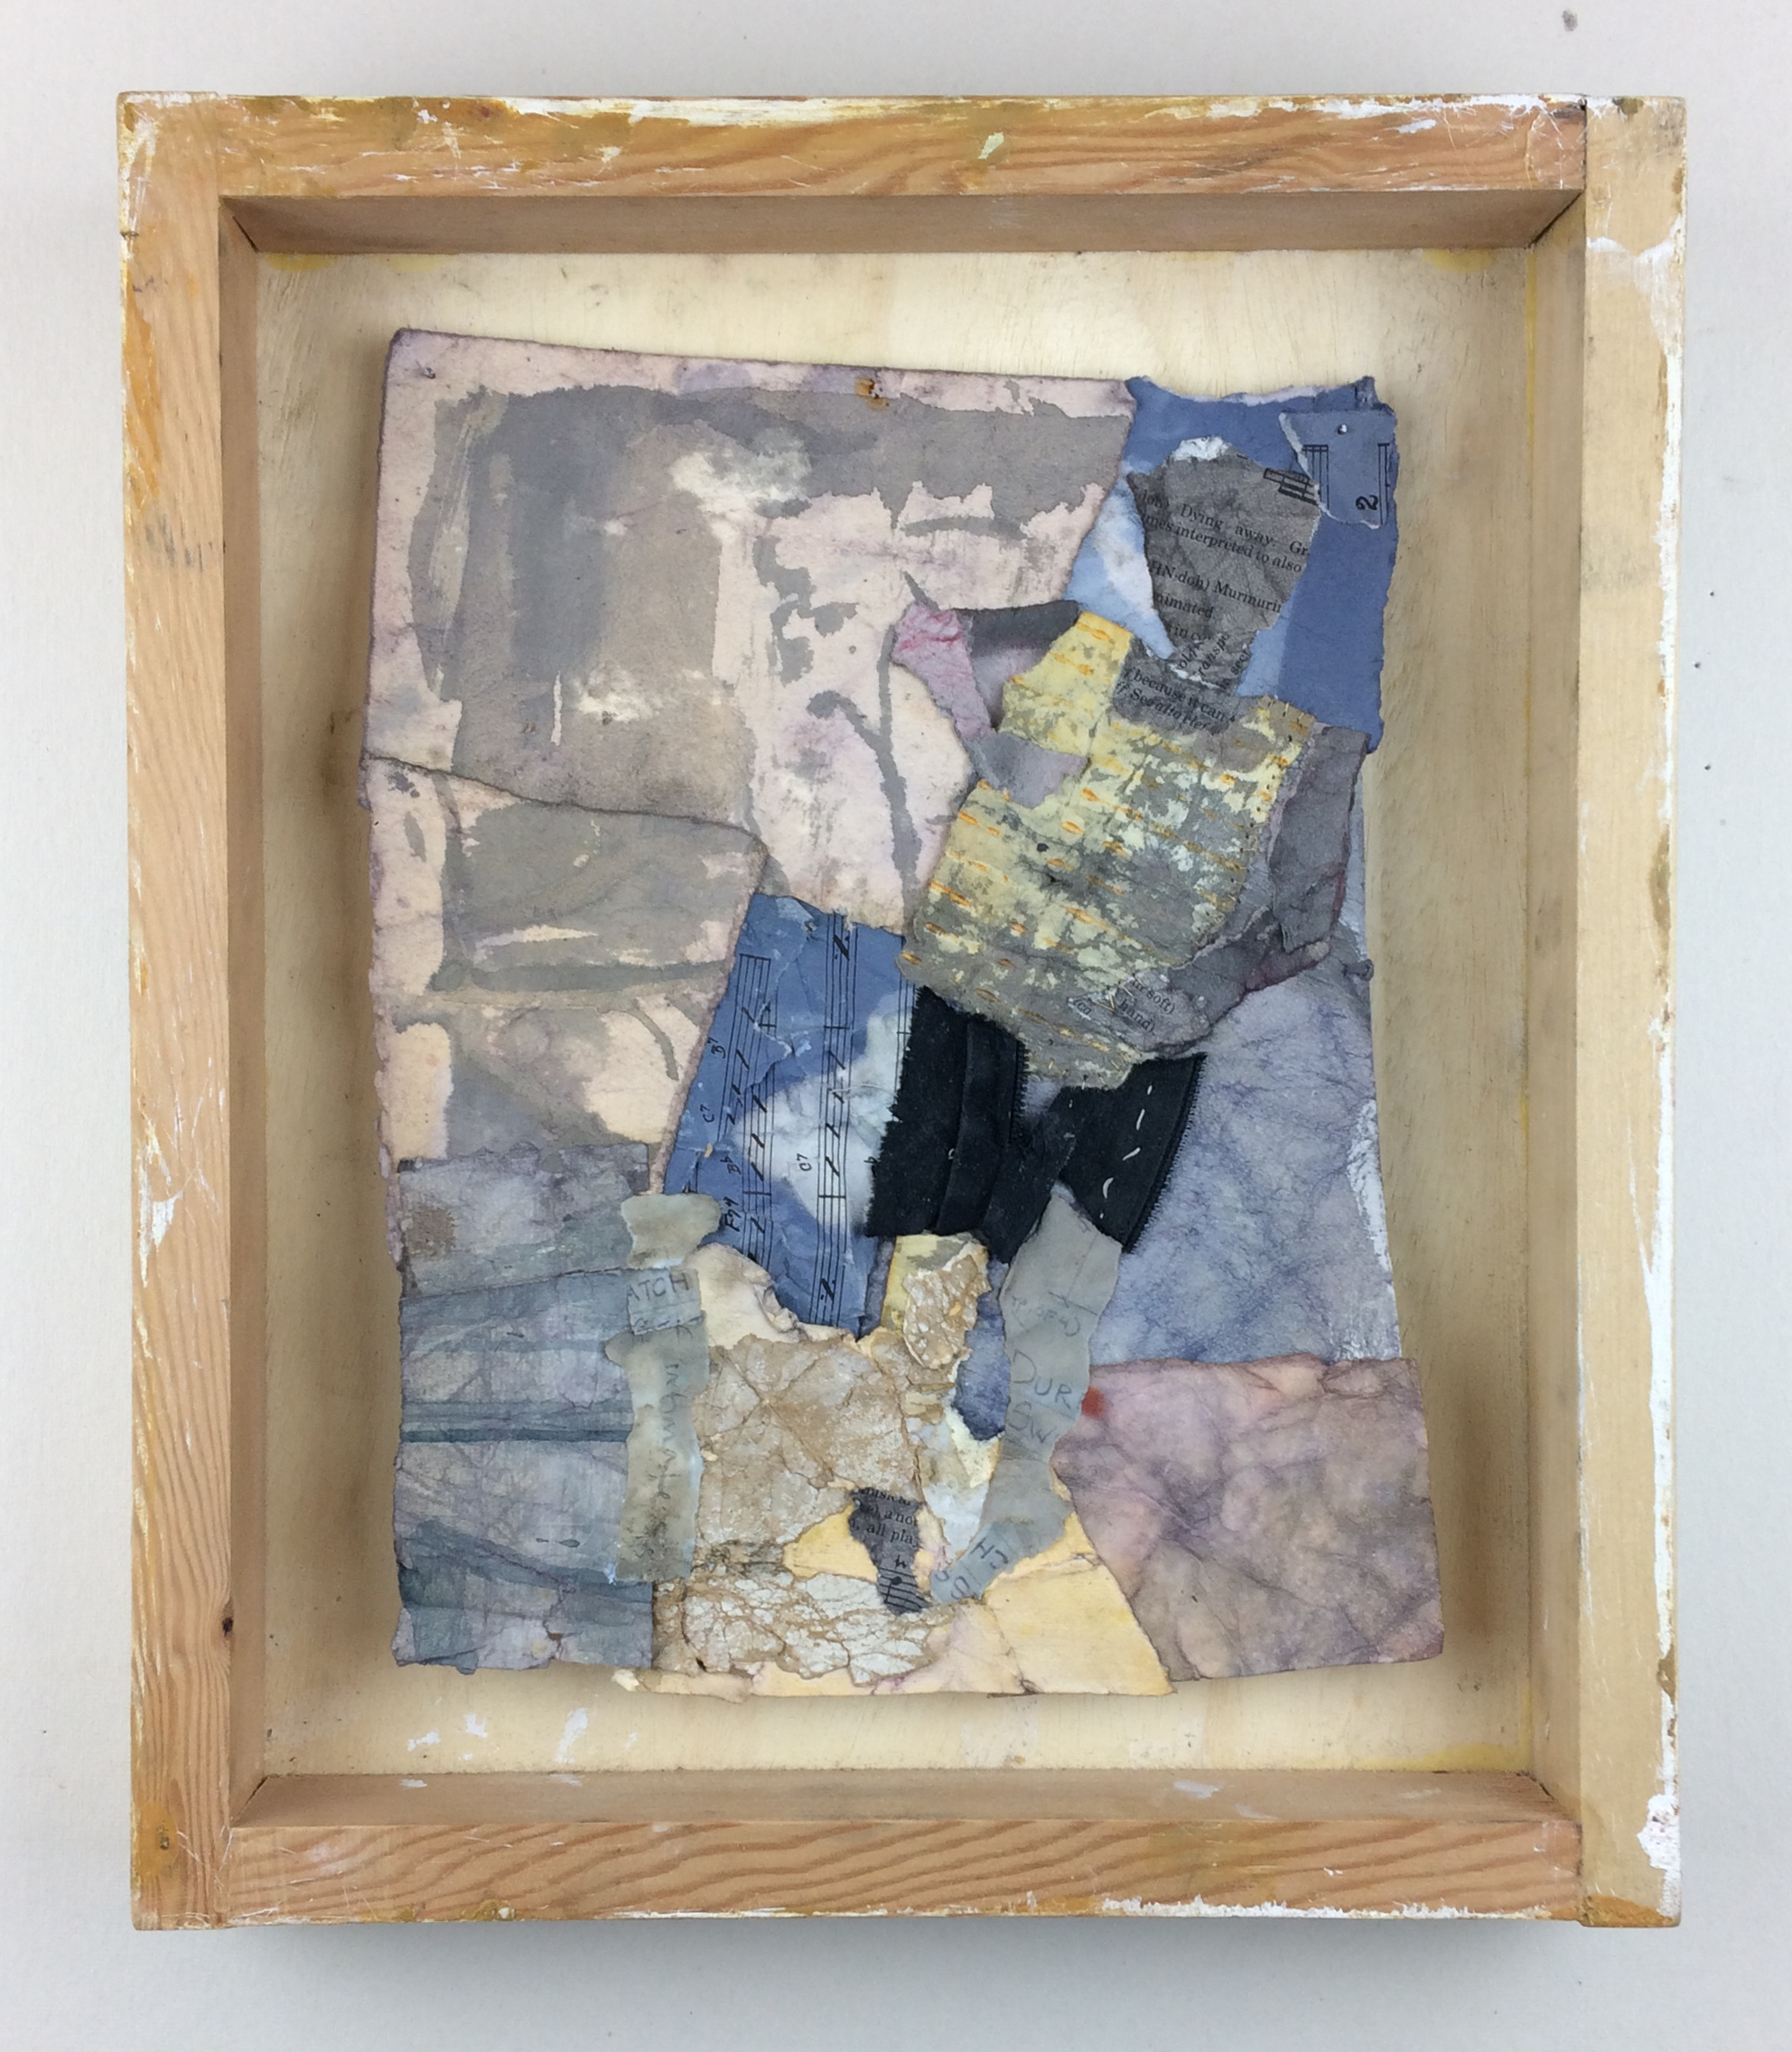 Black Shorts, found and dyed paper, cloth, thread, 14" x 12", 2016 